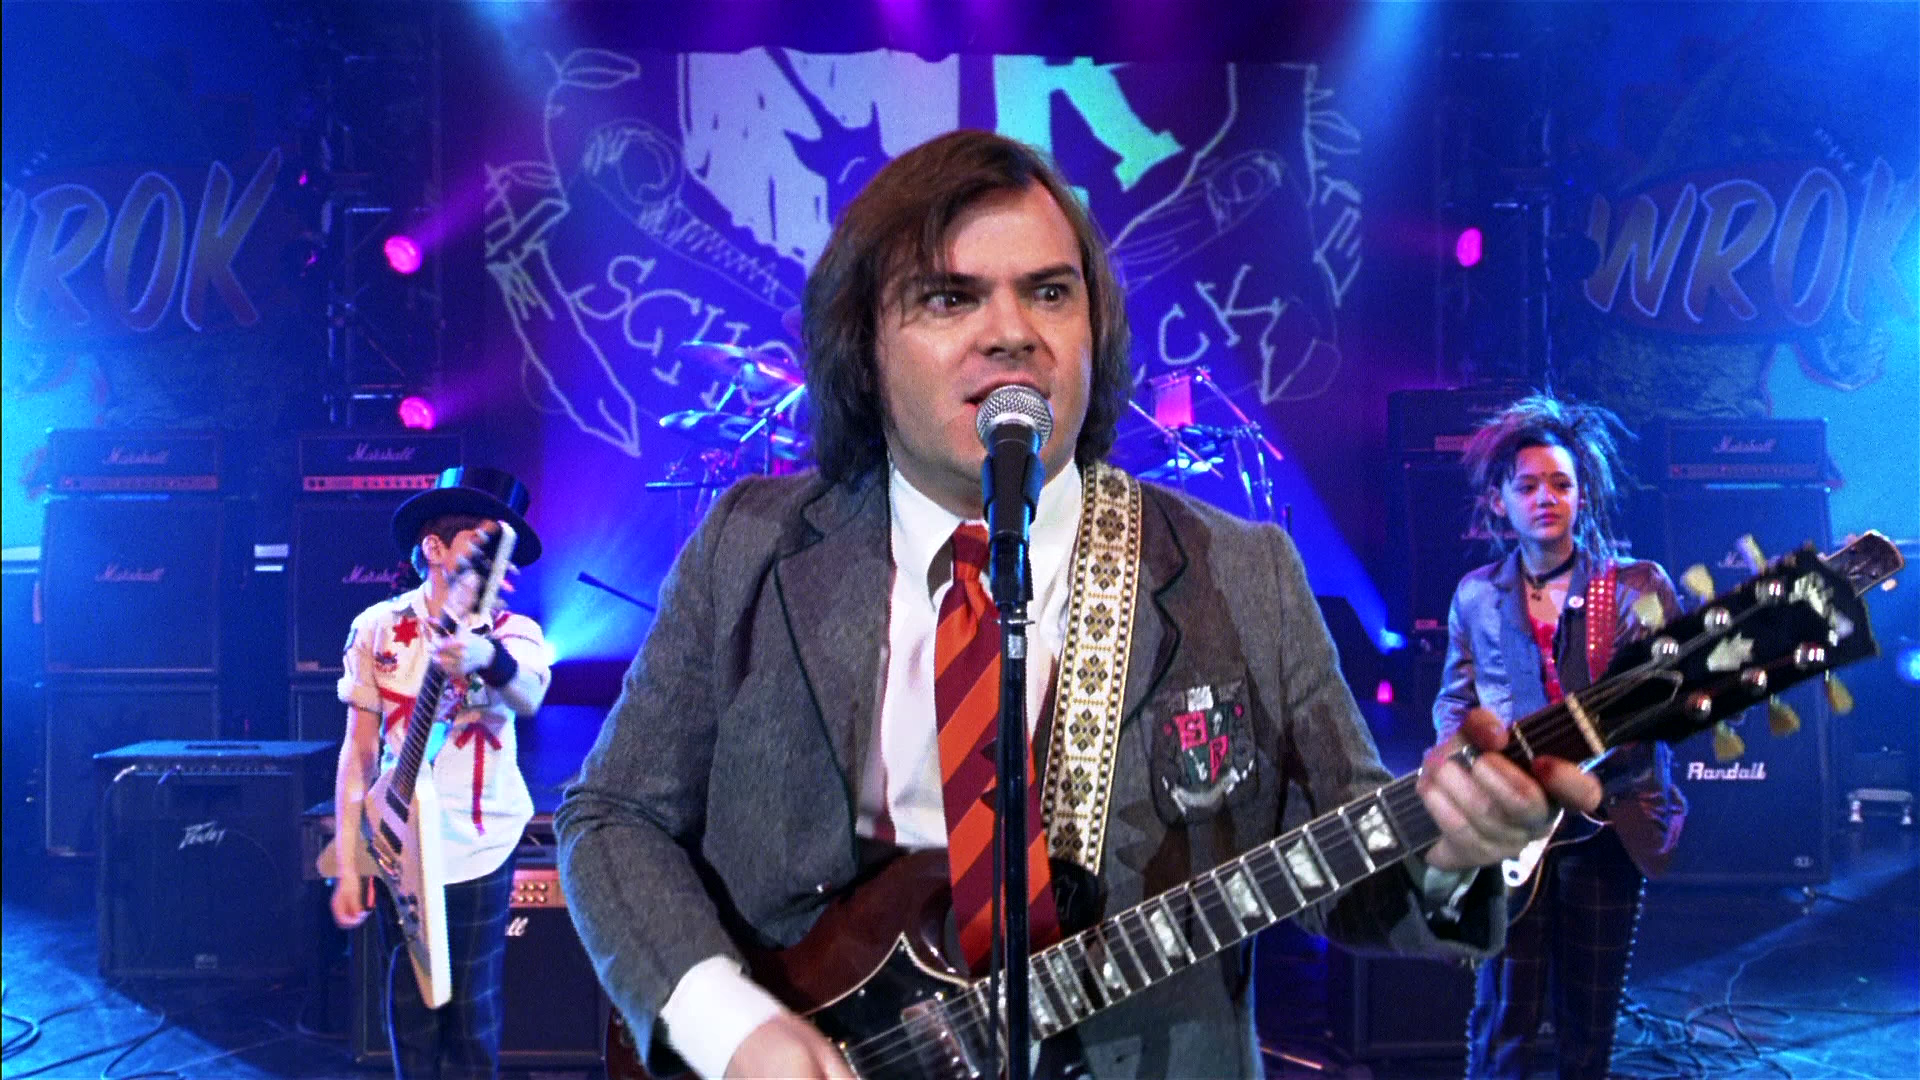 Comedy Film School of Rock of Rock Image, Picture